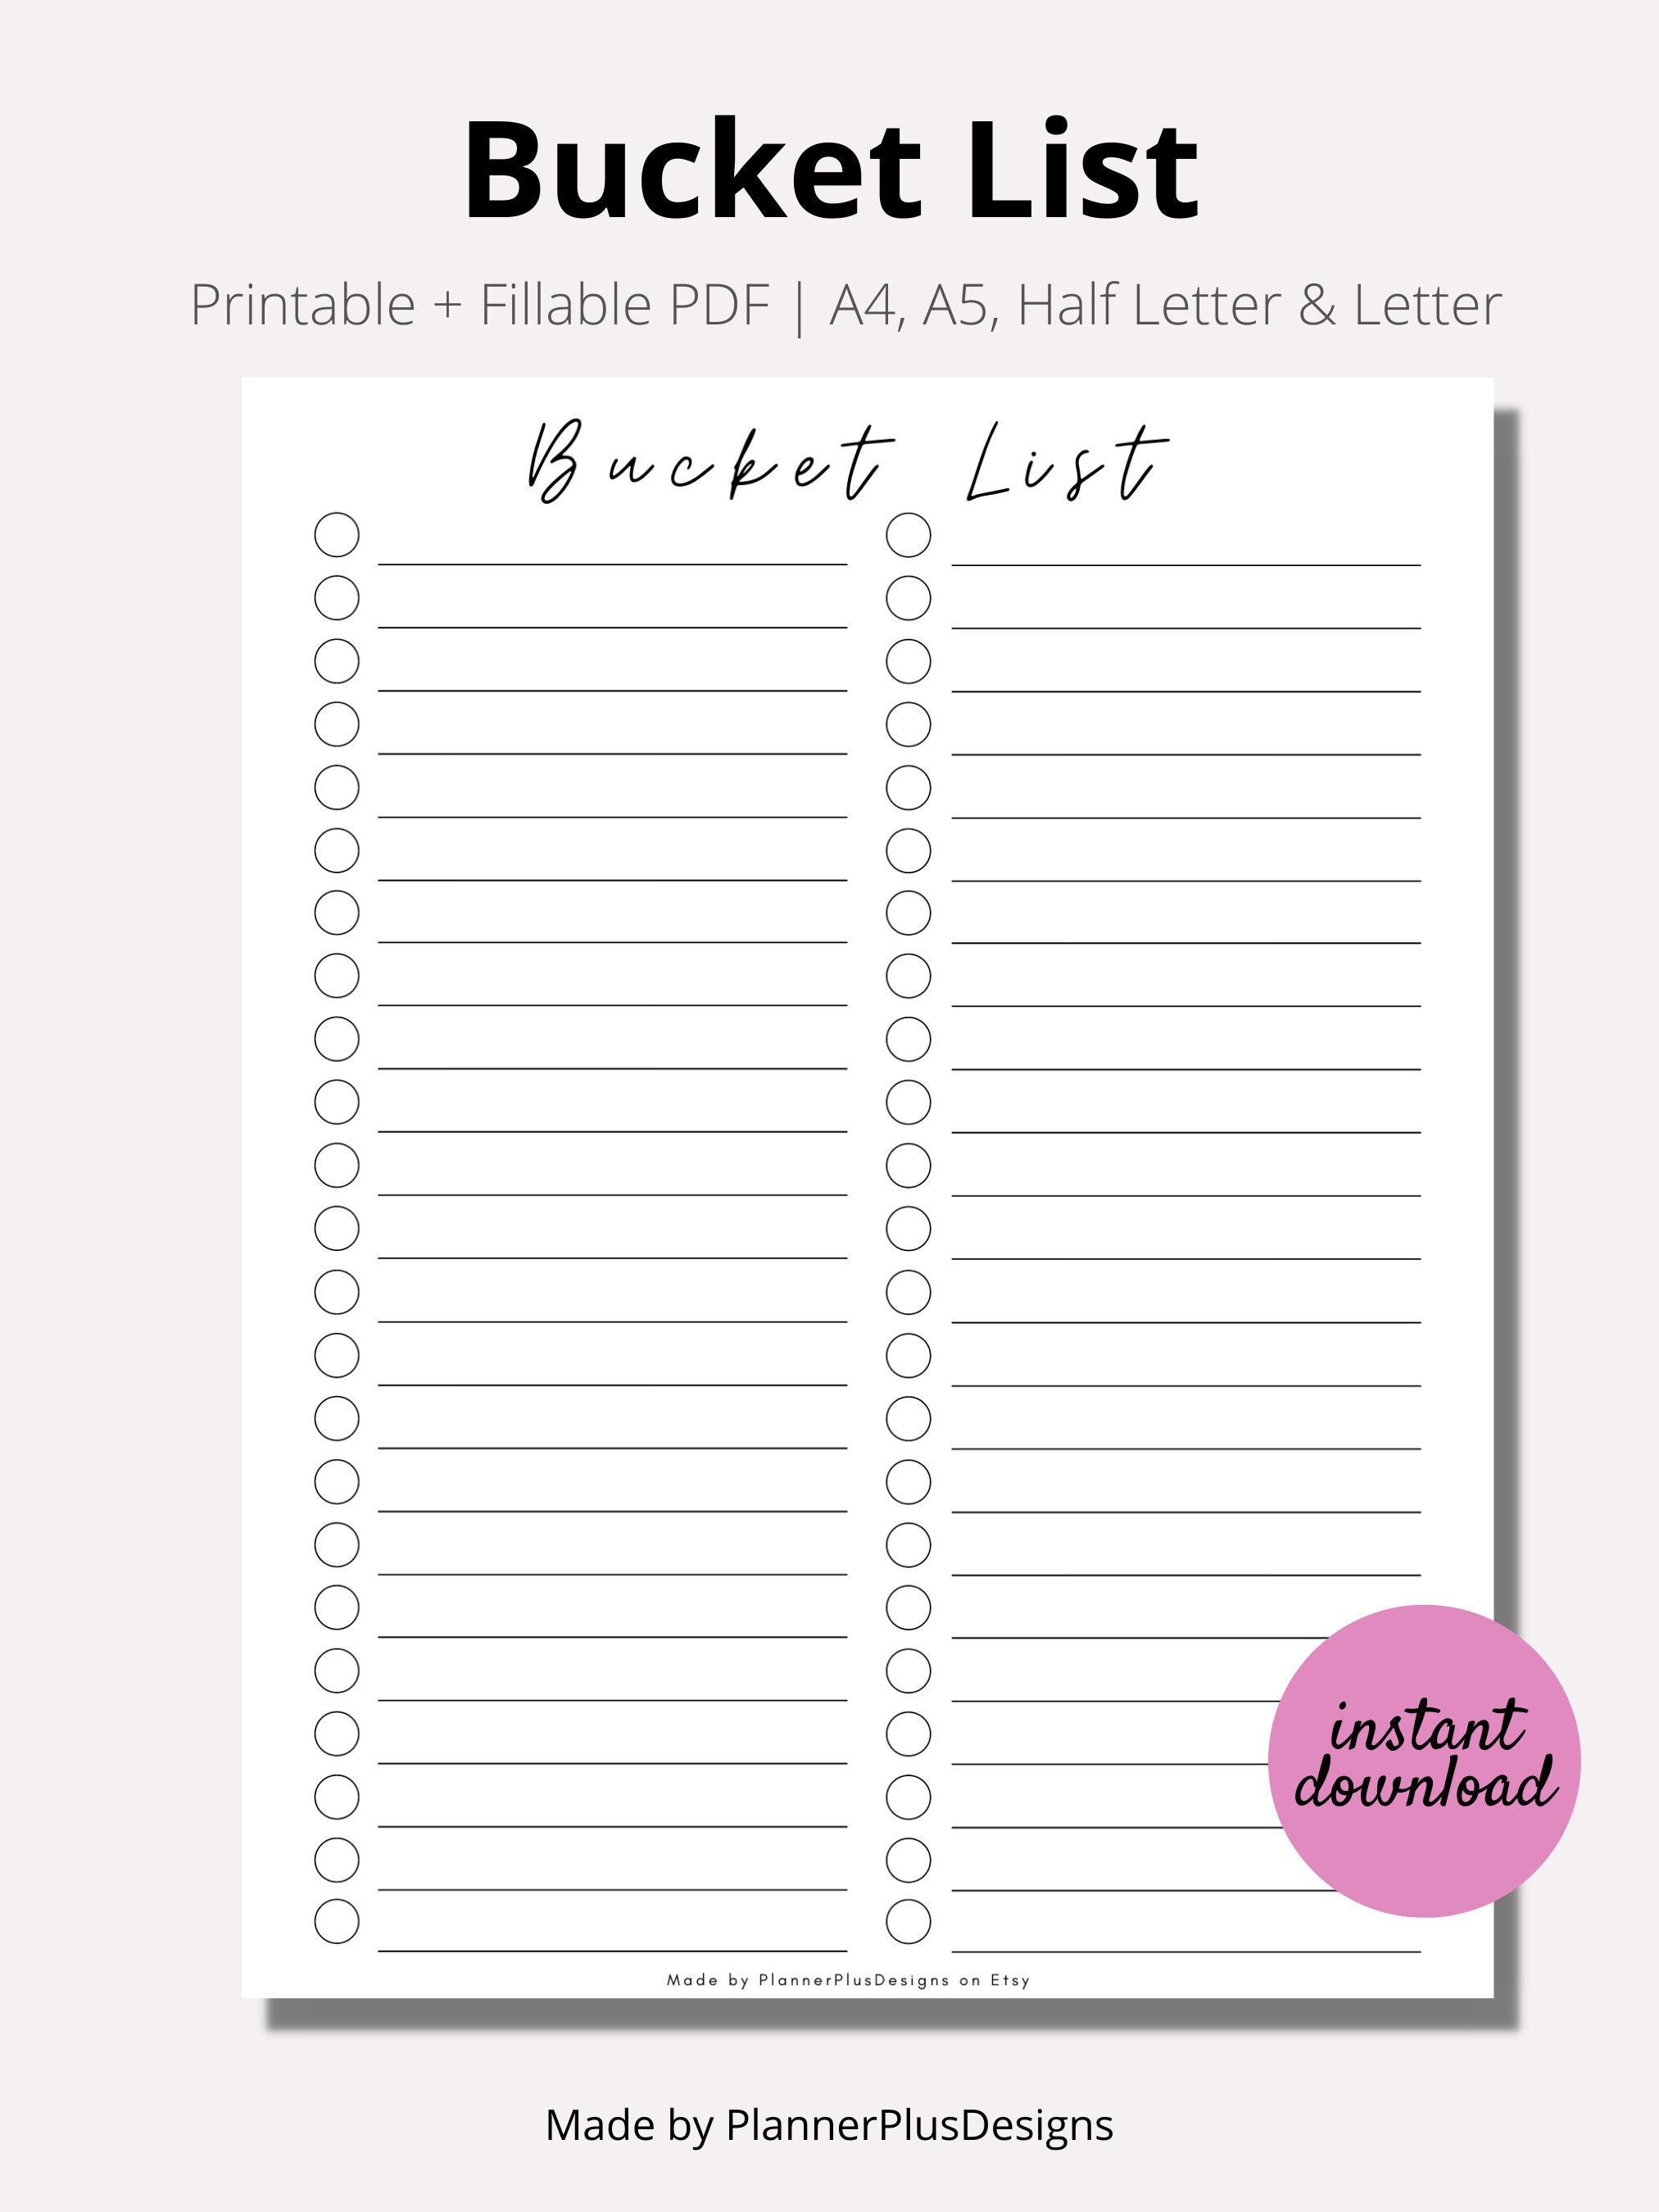 Calendars Planners Paper Party Supplies Paper Simple Bucket List 